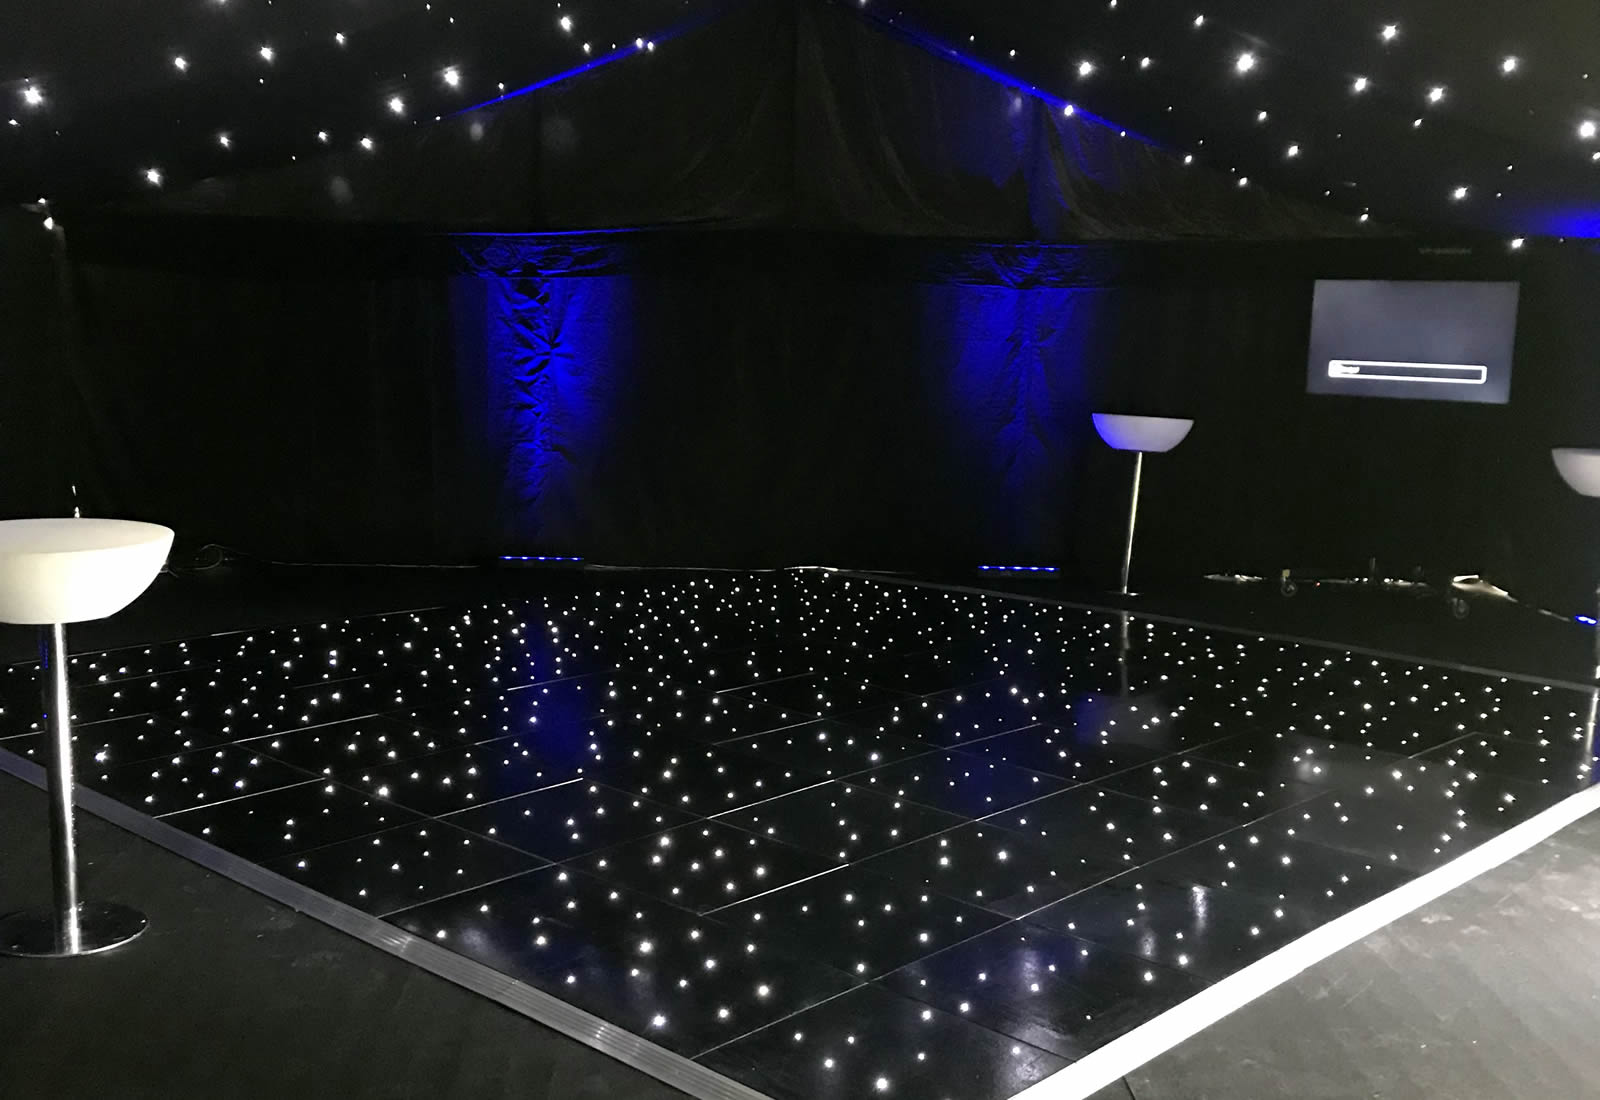 LED dance floor and star cloth in marquee